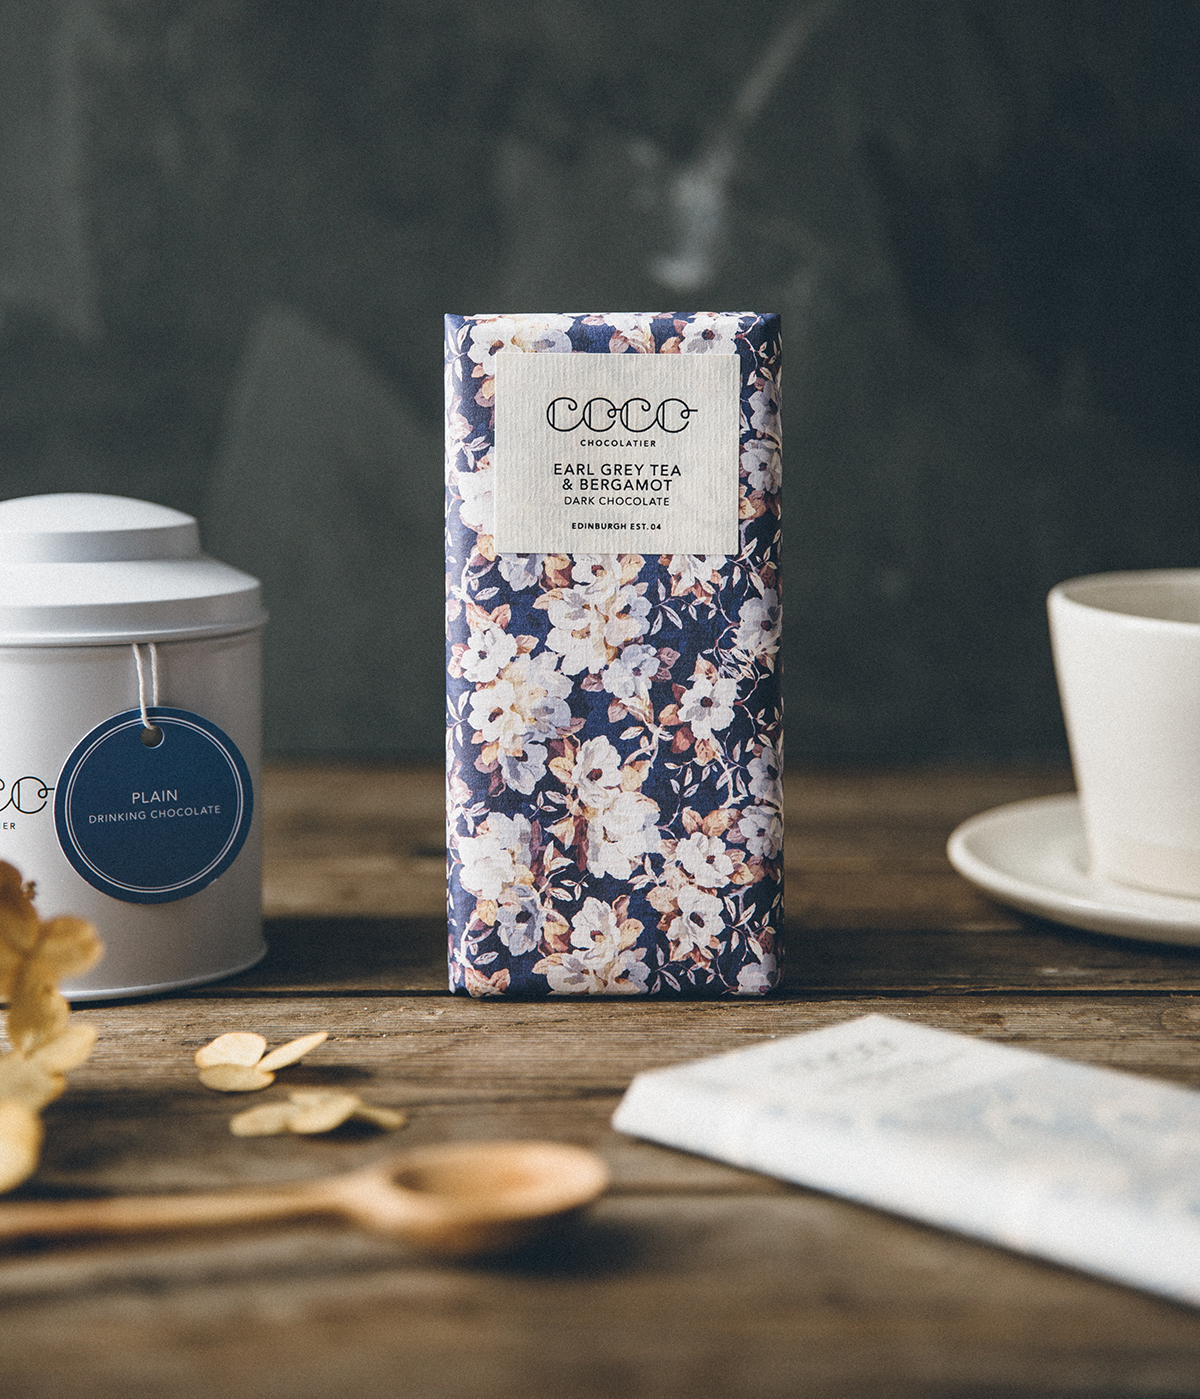 Earl Grey Tea & Bergamot Dark Chocolate, The Future Kept, £4.50 Crafted by Coco Chocolatier in Edinburgh, this bar is beautiful inside and out.  